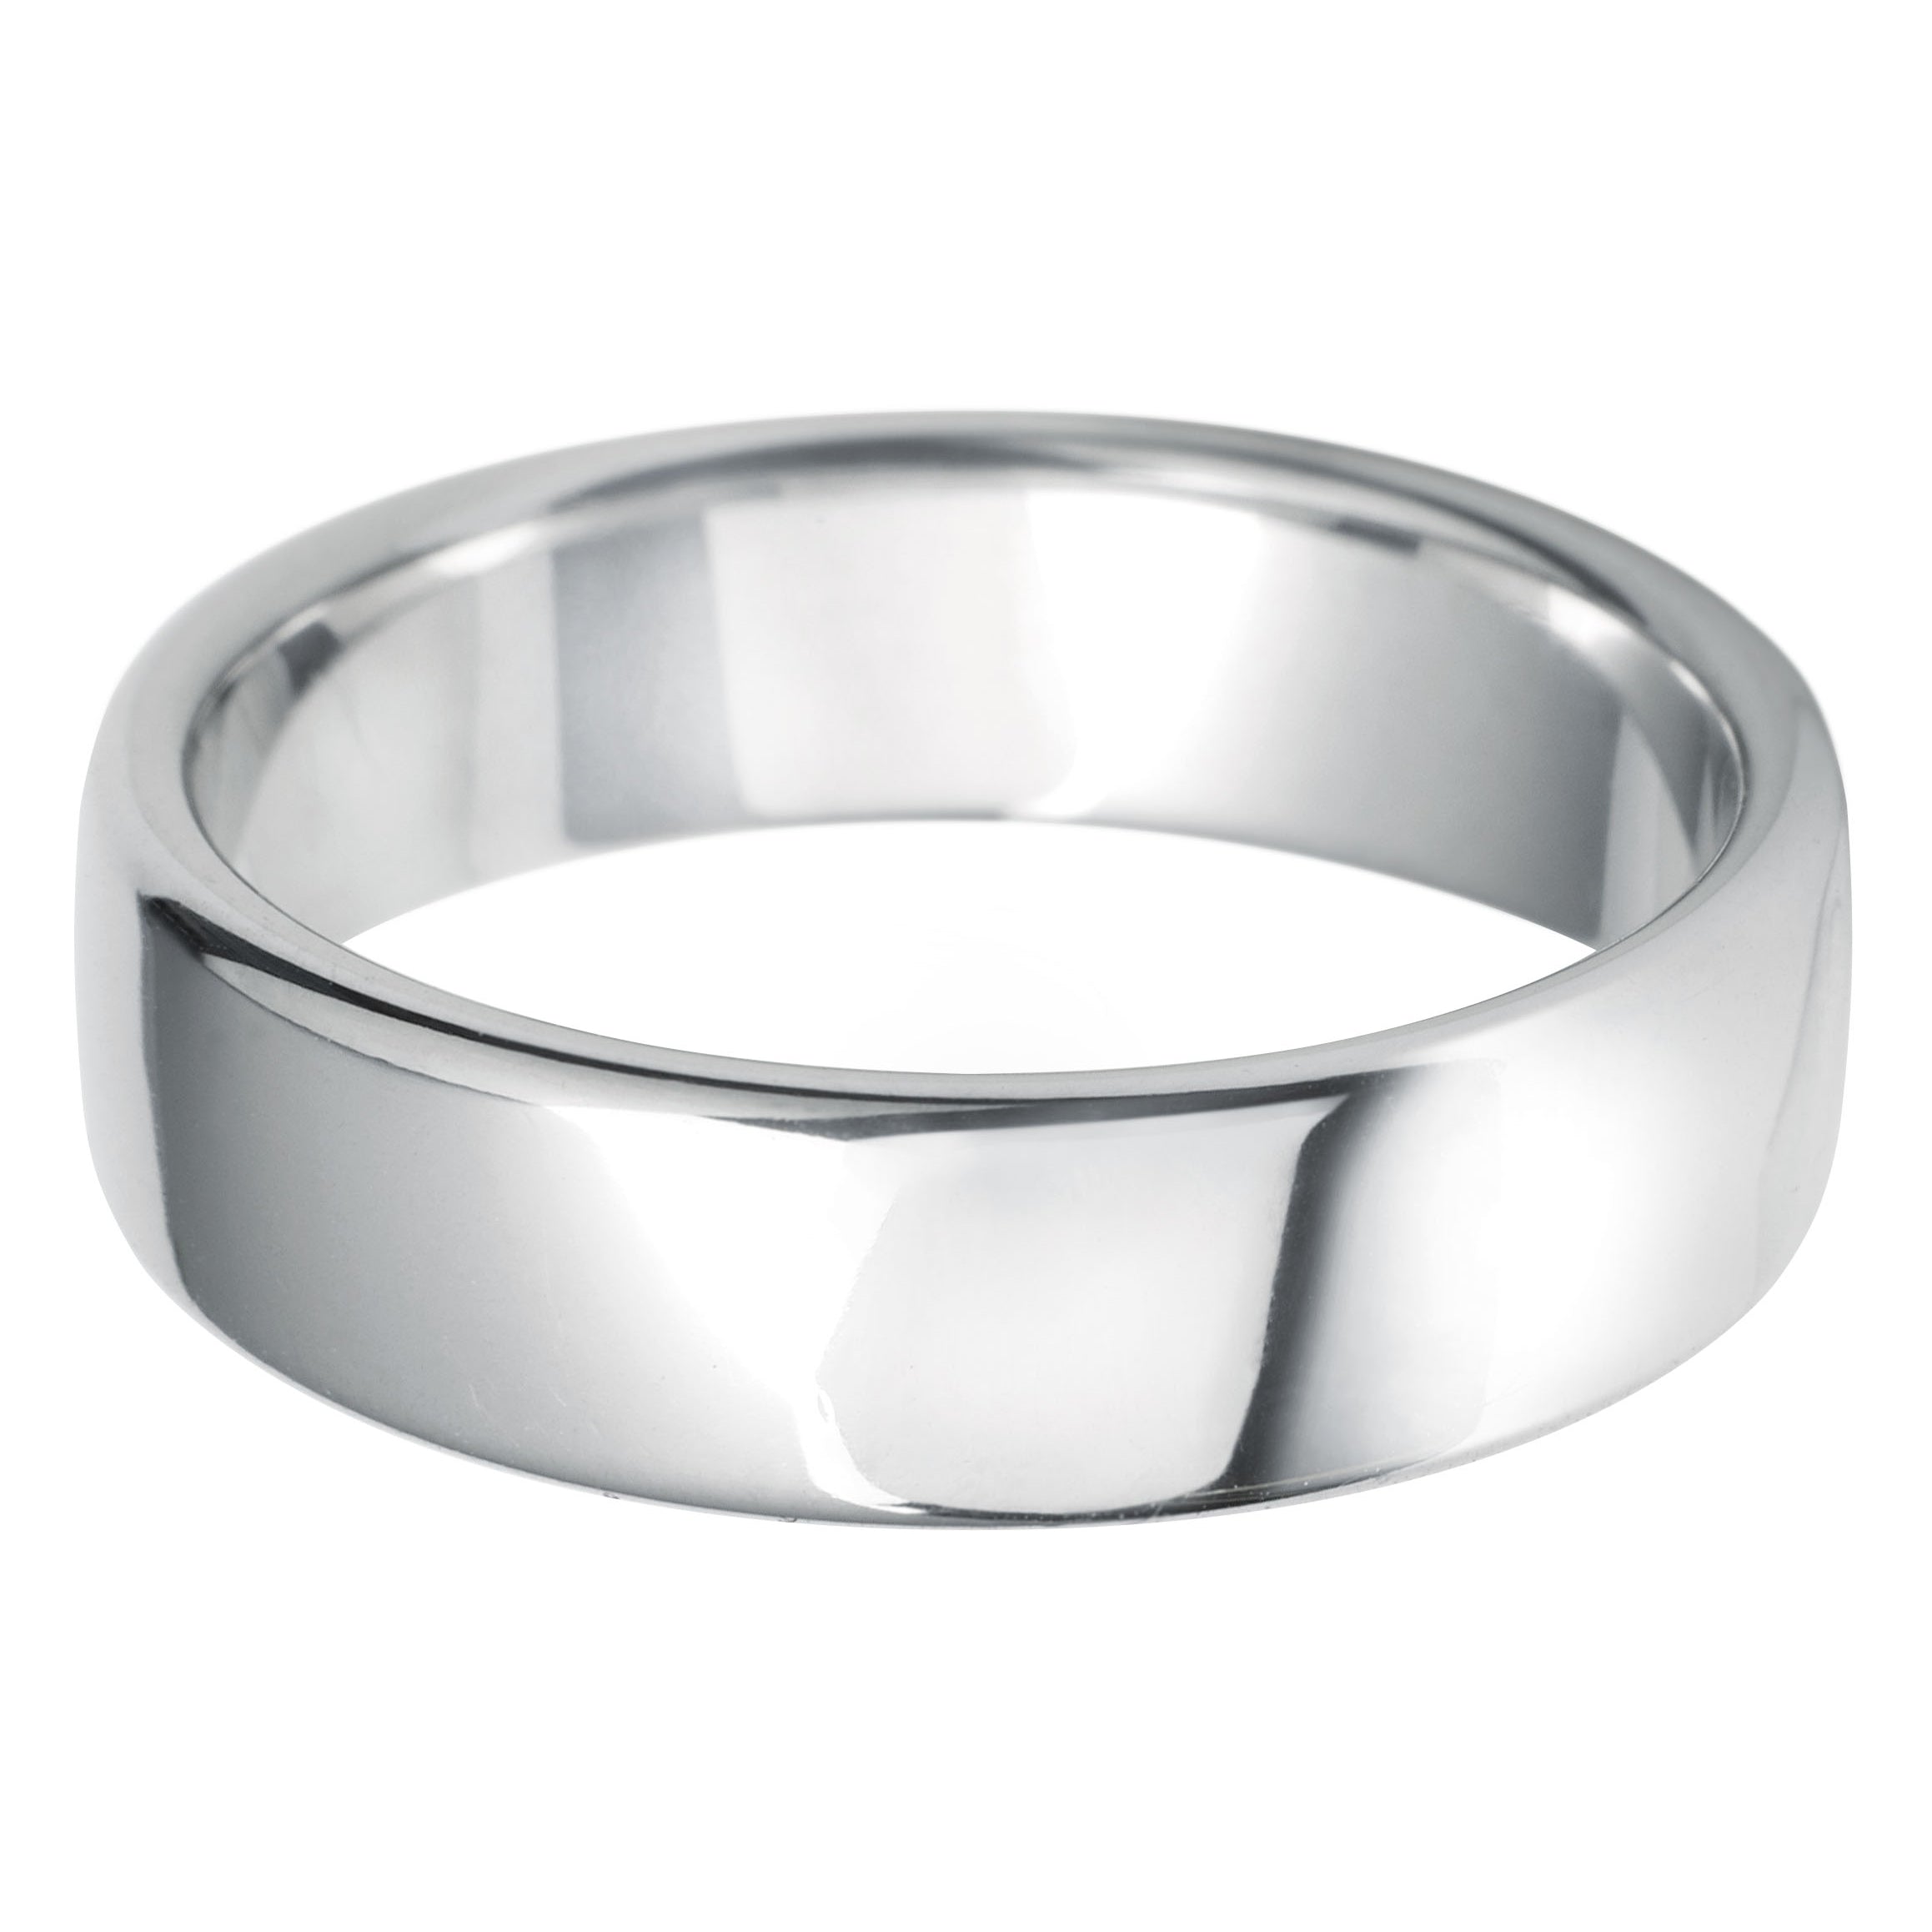 6mm Rounded Flat Heavy Weight Wedding Ring